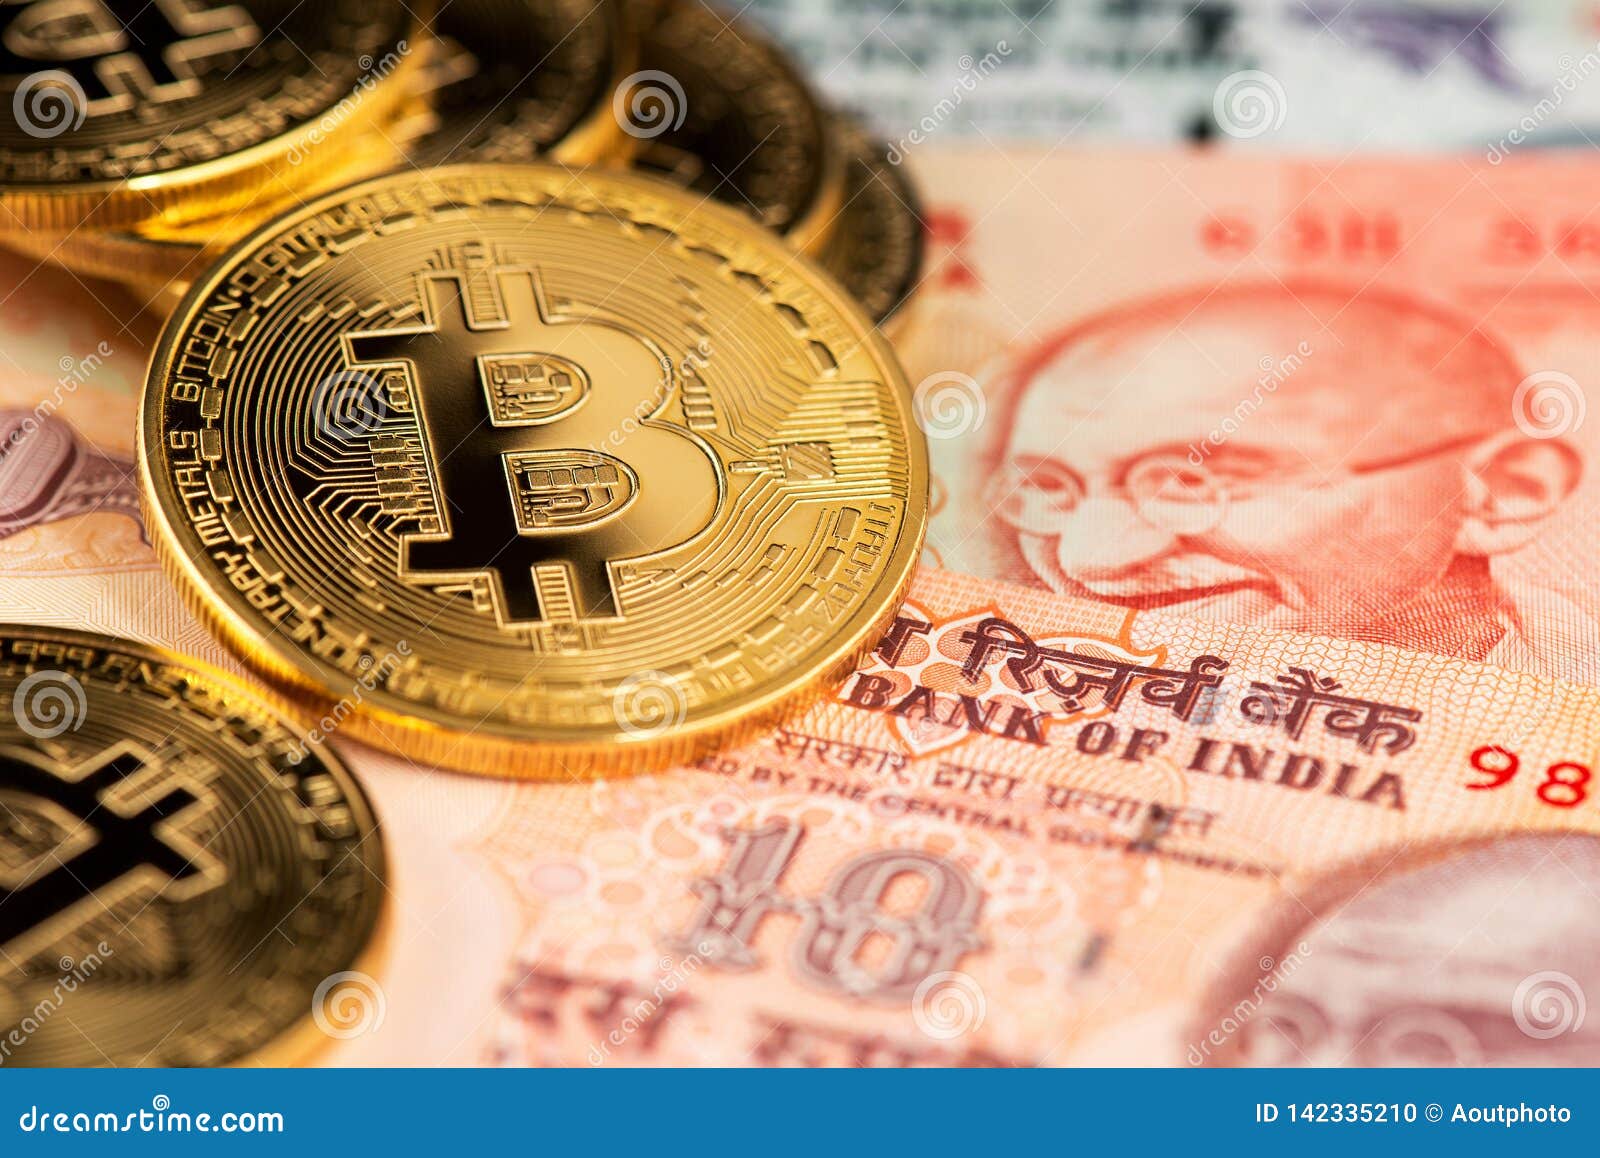 1 bitcoin price in indian currency